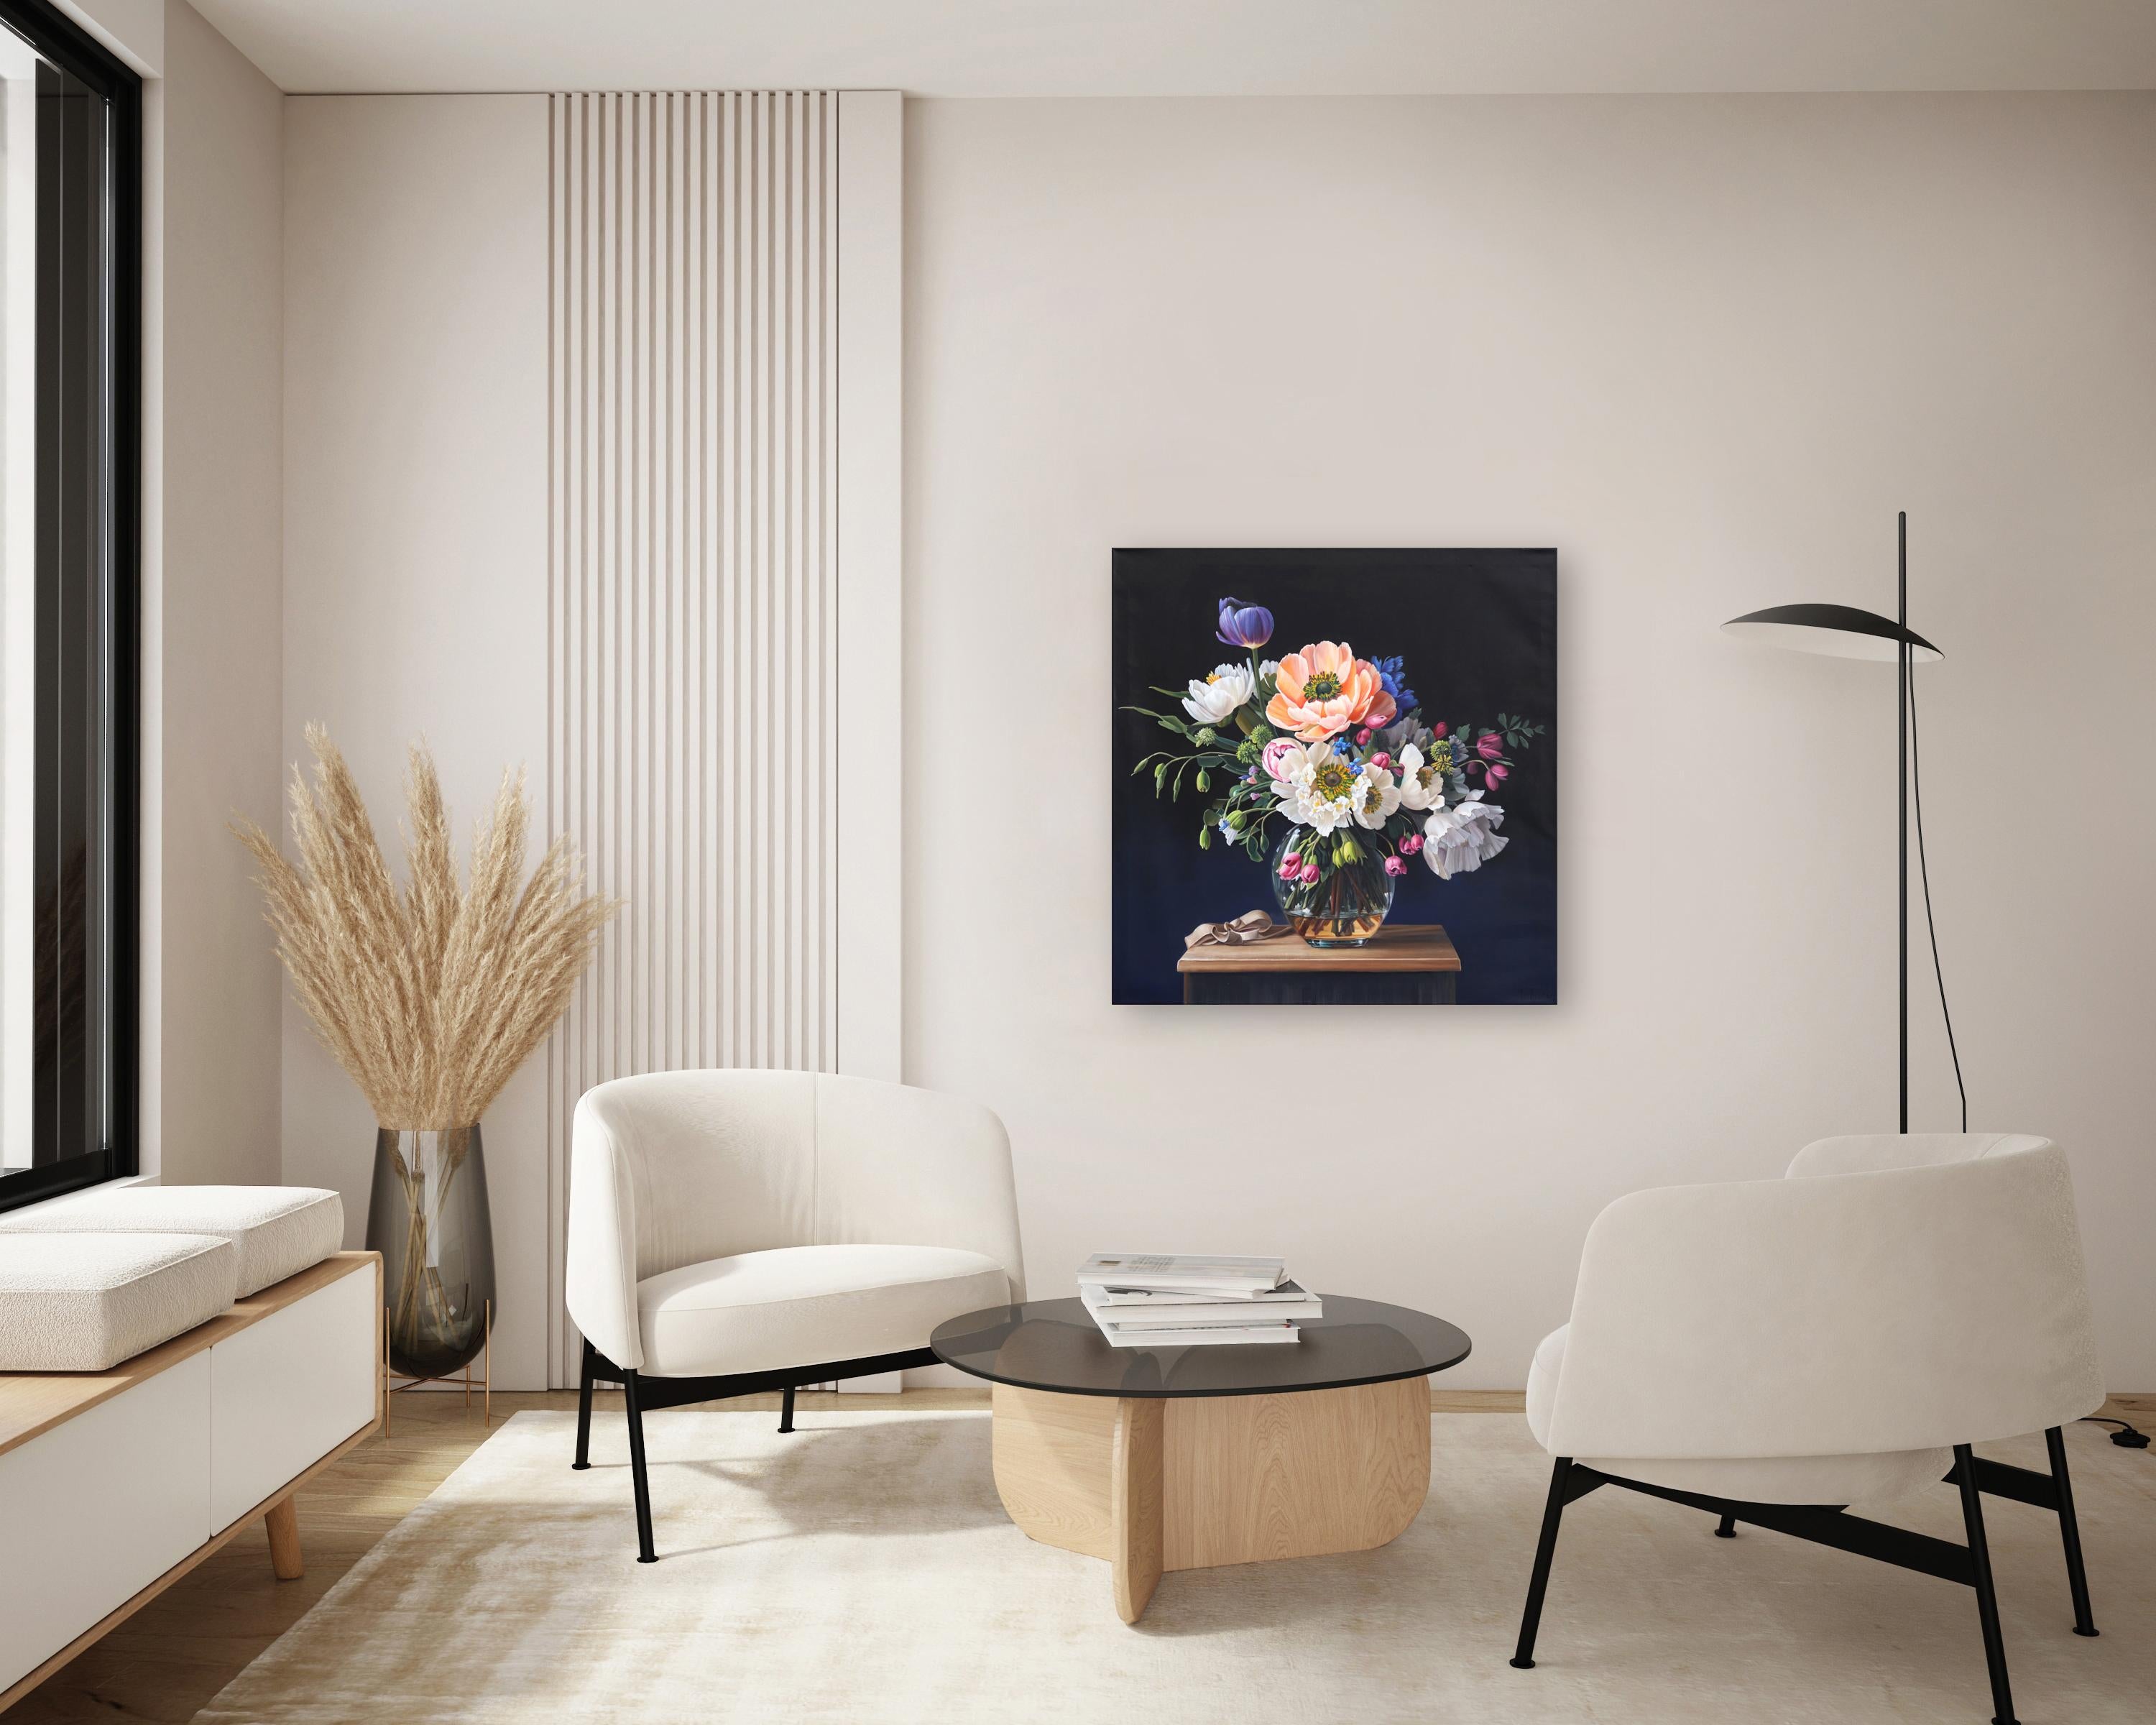 With a contemporary perspective on landscape painting and inspired by paintings created by old masters, German artist Katharina Husslein paints in a representational manner to capture lively bouquets and saturated idyllic landscapes. Her passion for